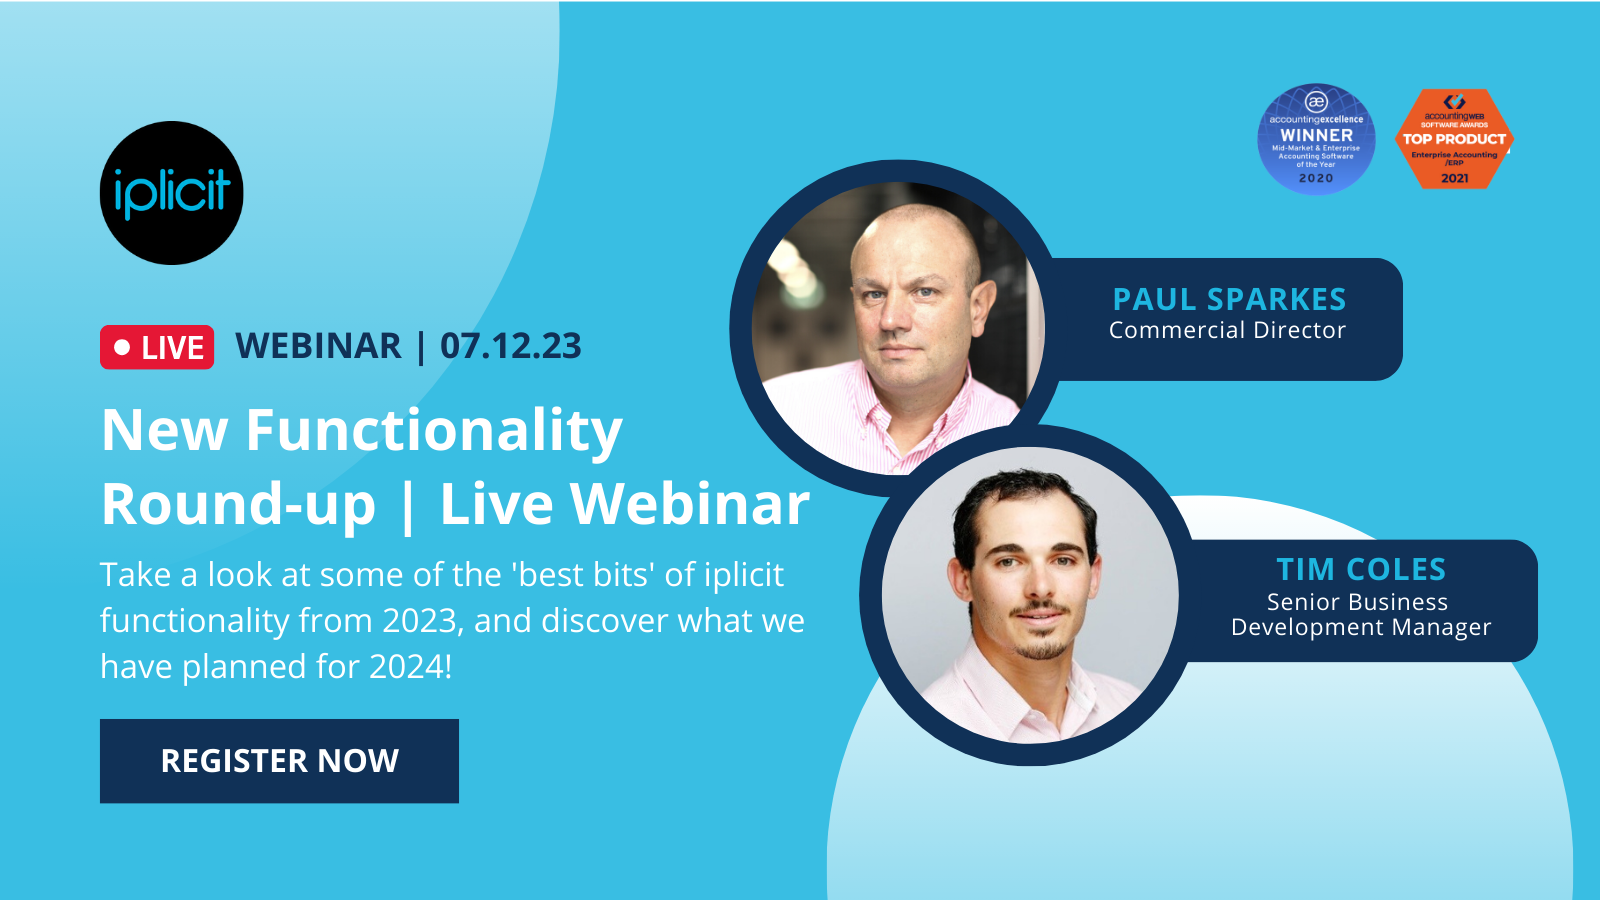 New Functionality Round-up webinar with iplicit:  image